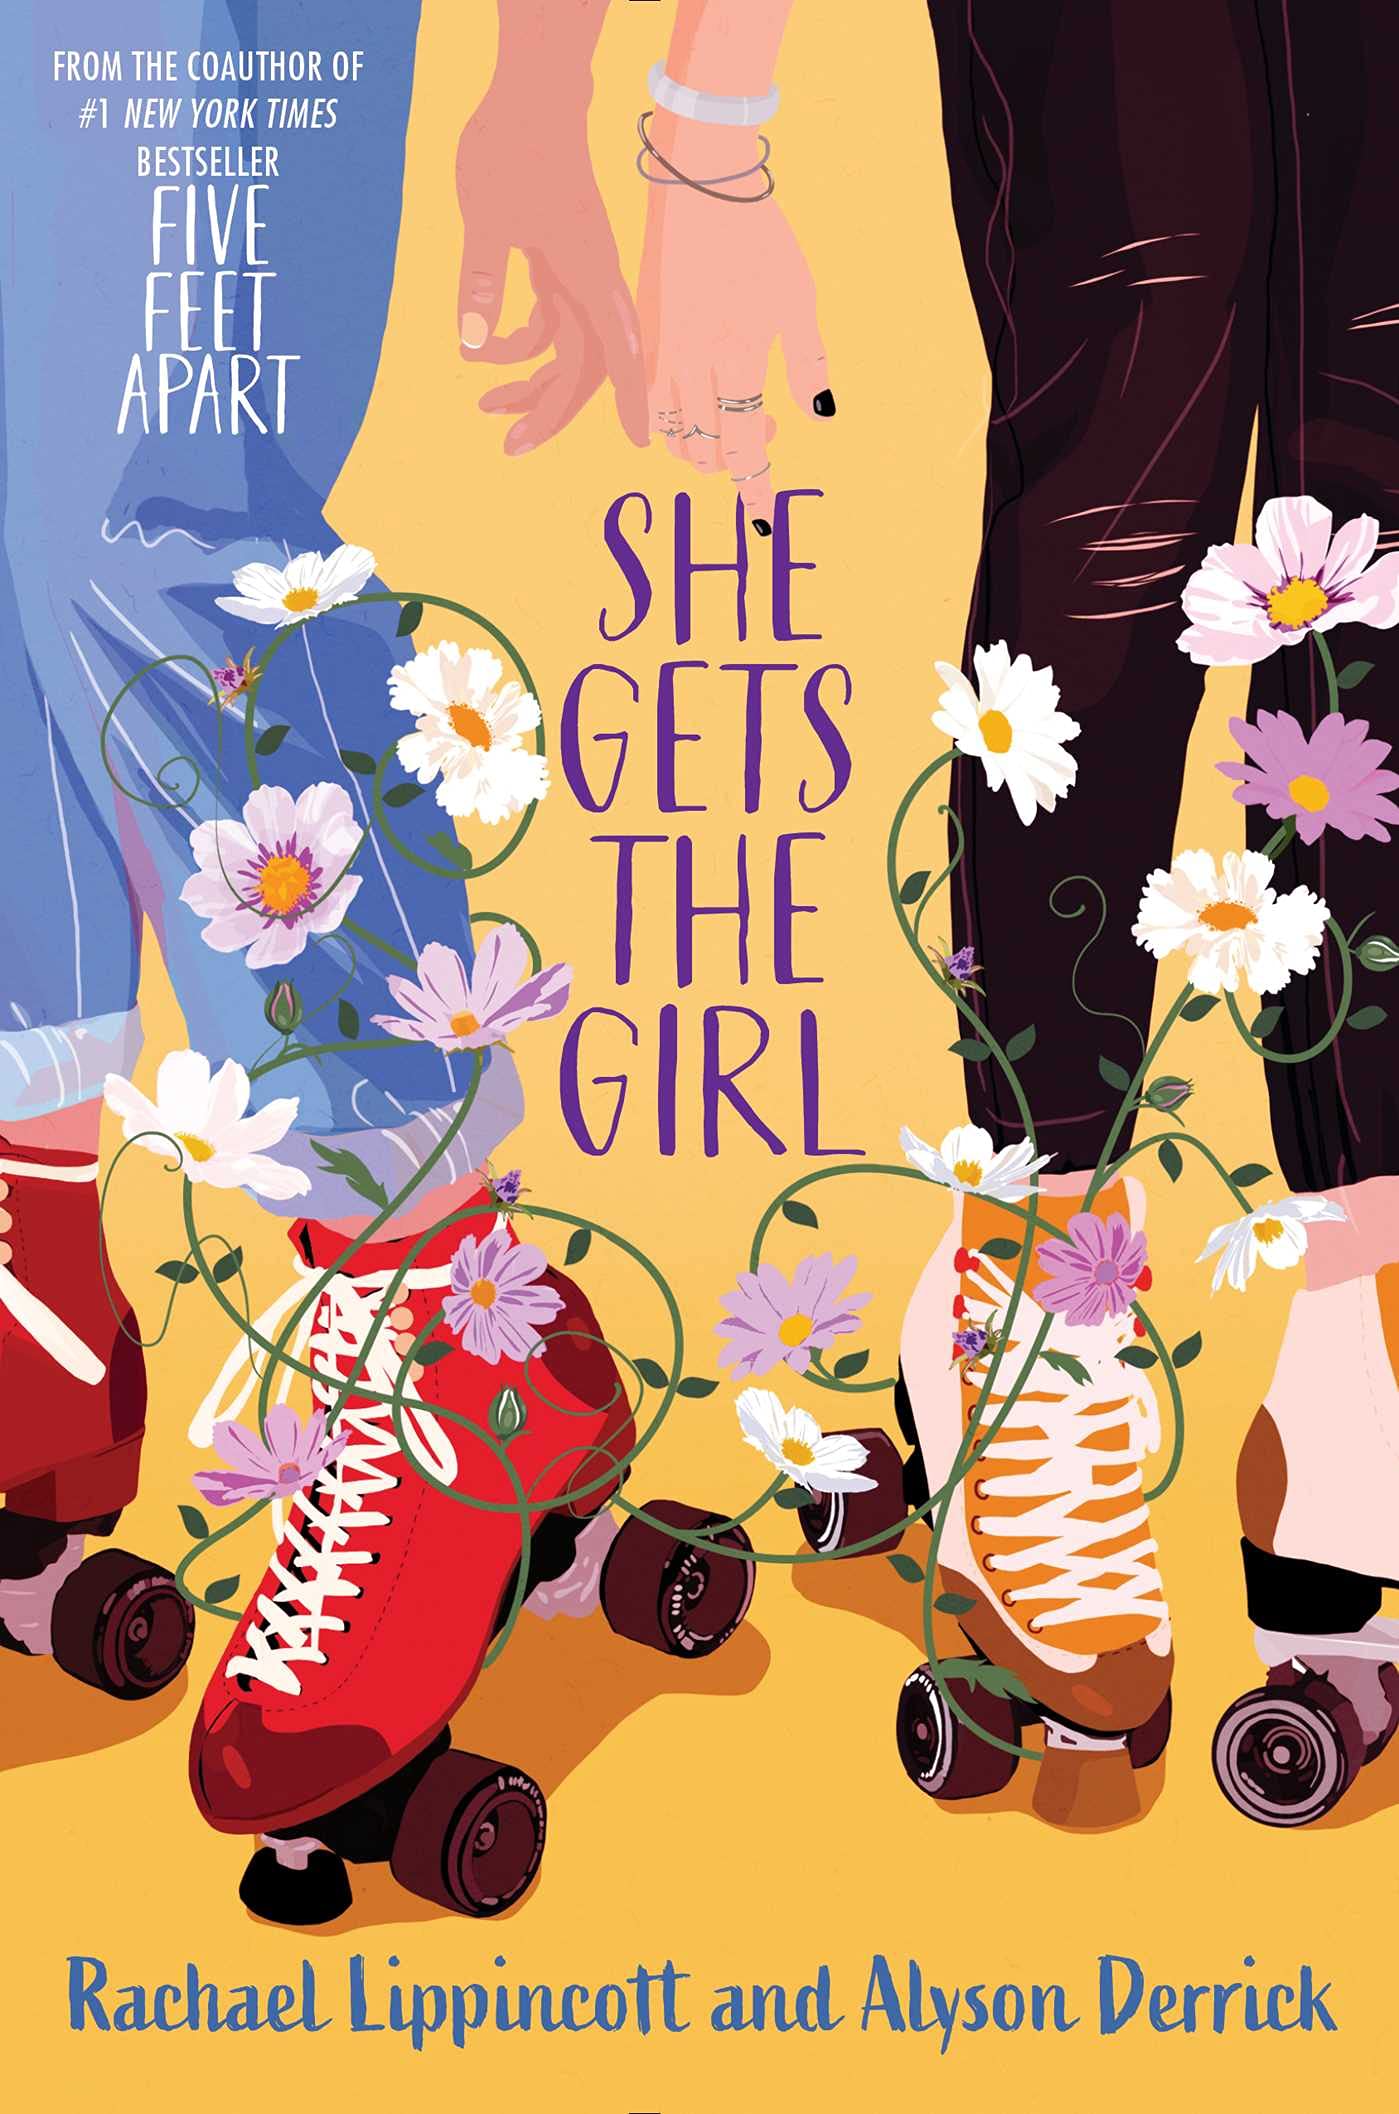 Cover of “She Gets the Girl” by Rachael Lippincott